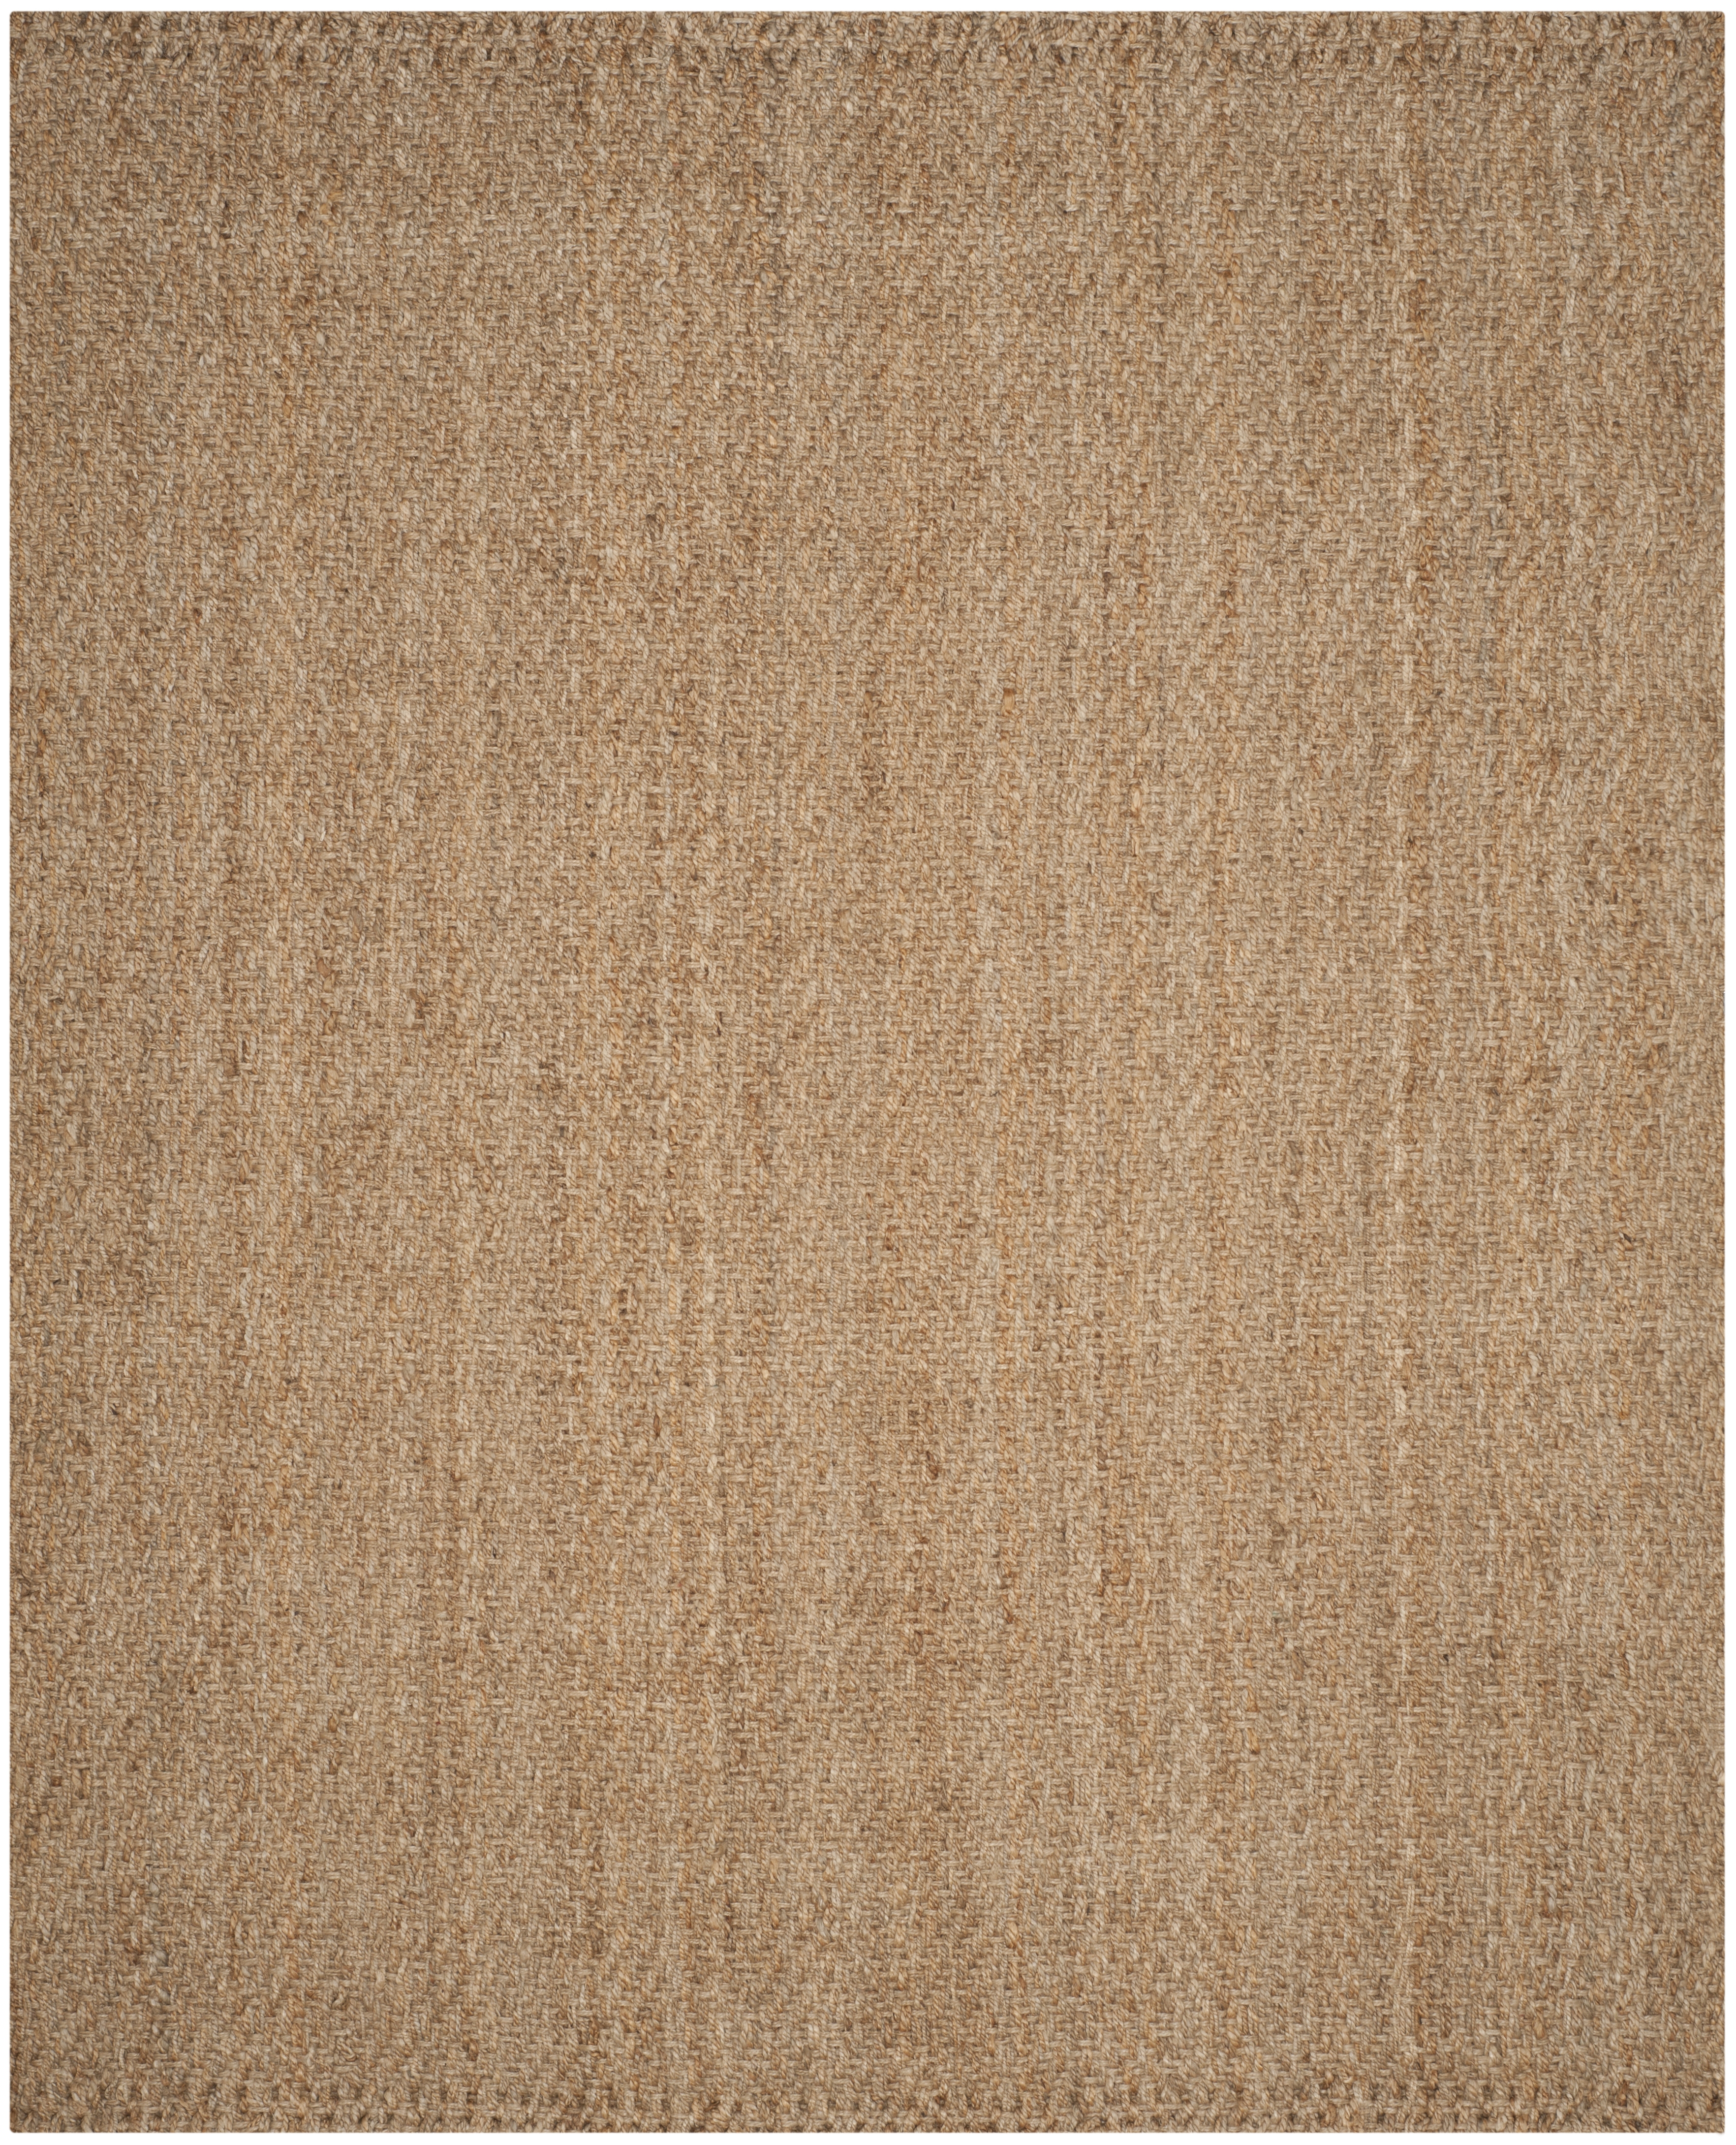 Arlo Home Hand Woven Area Rug, NF181A, Natural/Natural,  9' X 12' - Image 0